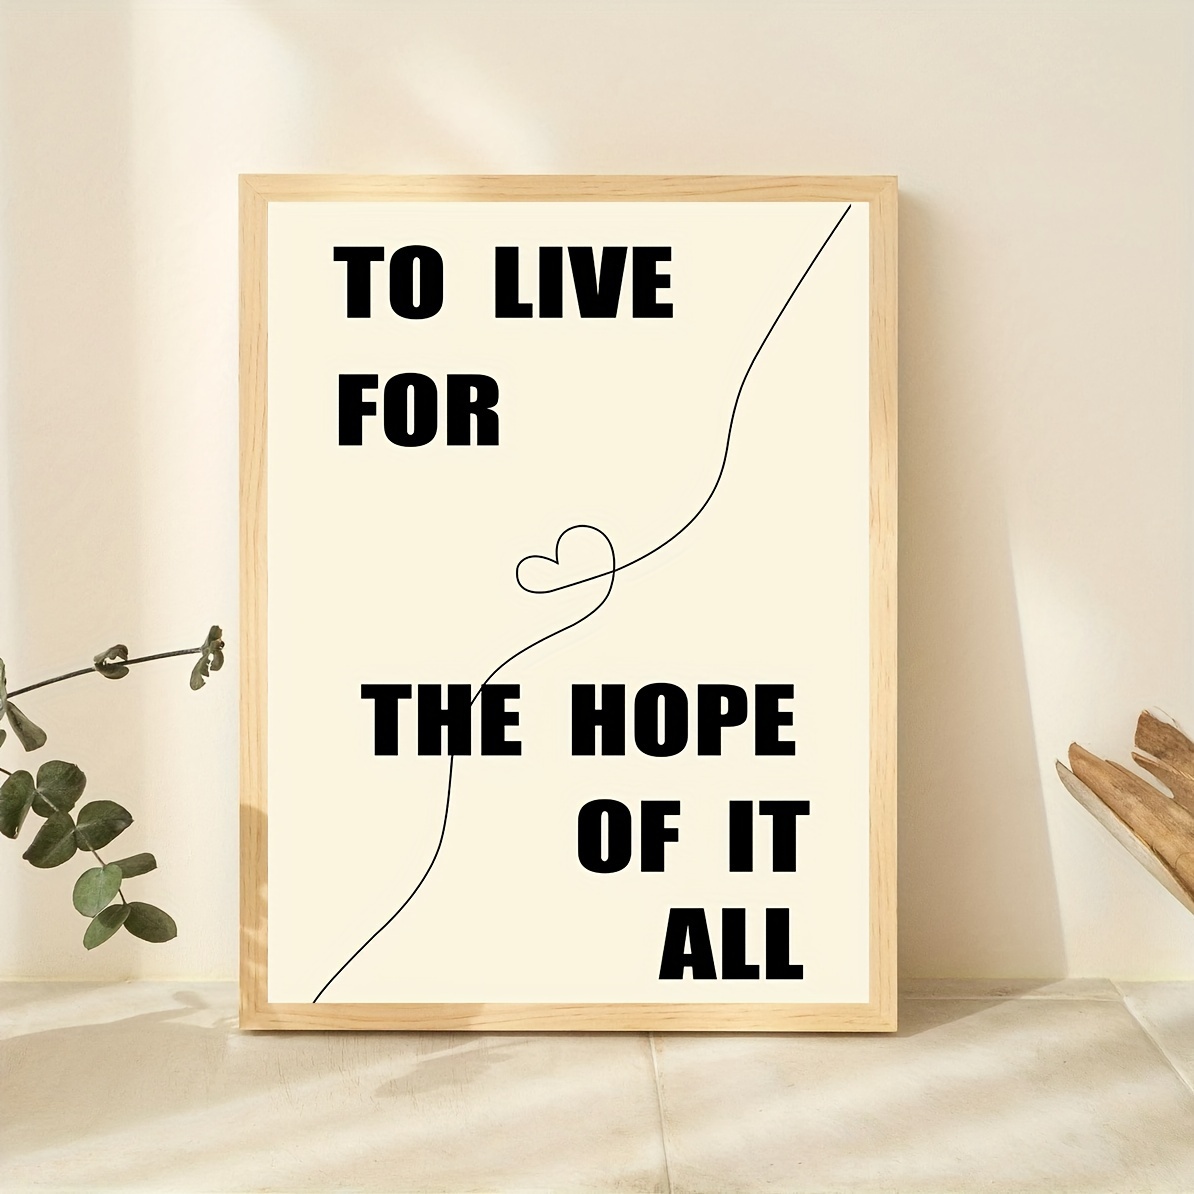  Uroko Taylor%Swift% Lyrics Poster 90s Canvas Wall Art Room  Aesthetic Decor Posters 12x18inch(30x45cm): Posters & Prints